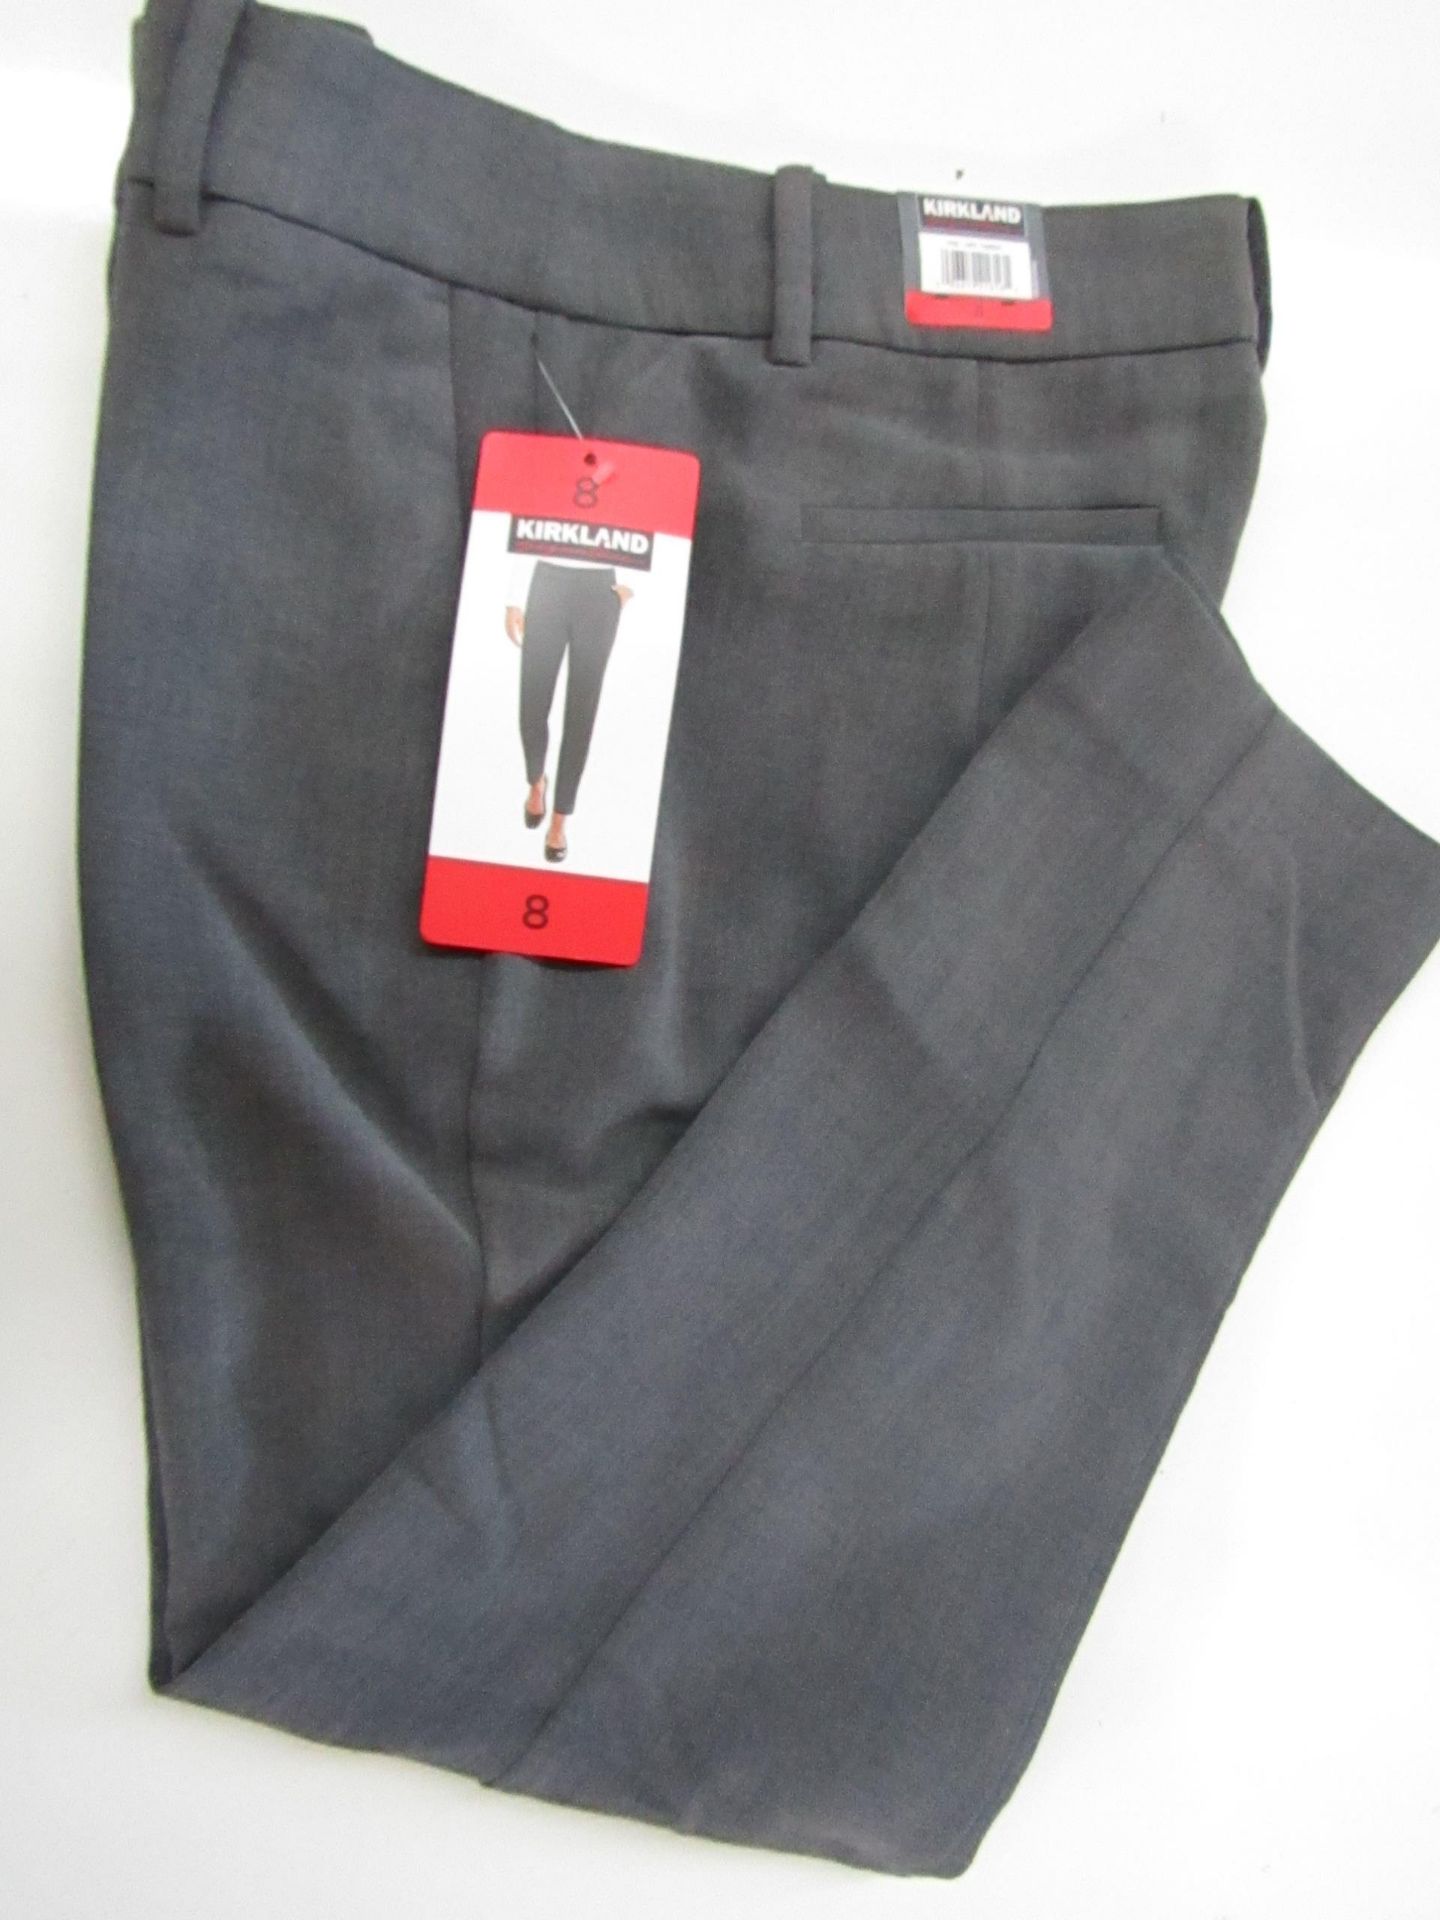 1 X Pair of Kirkland Signature Ladies Pants 27" Inseam Grey Size 8 New With Tags